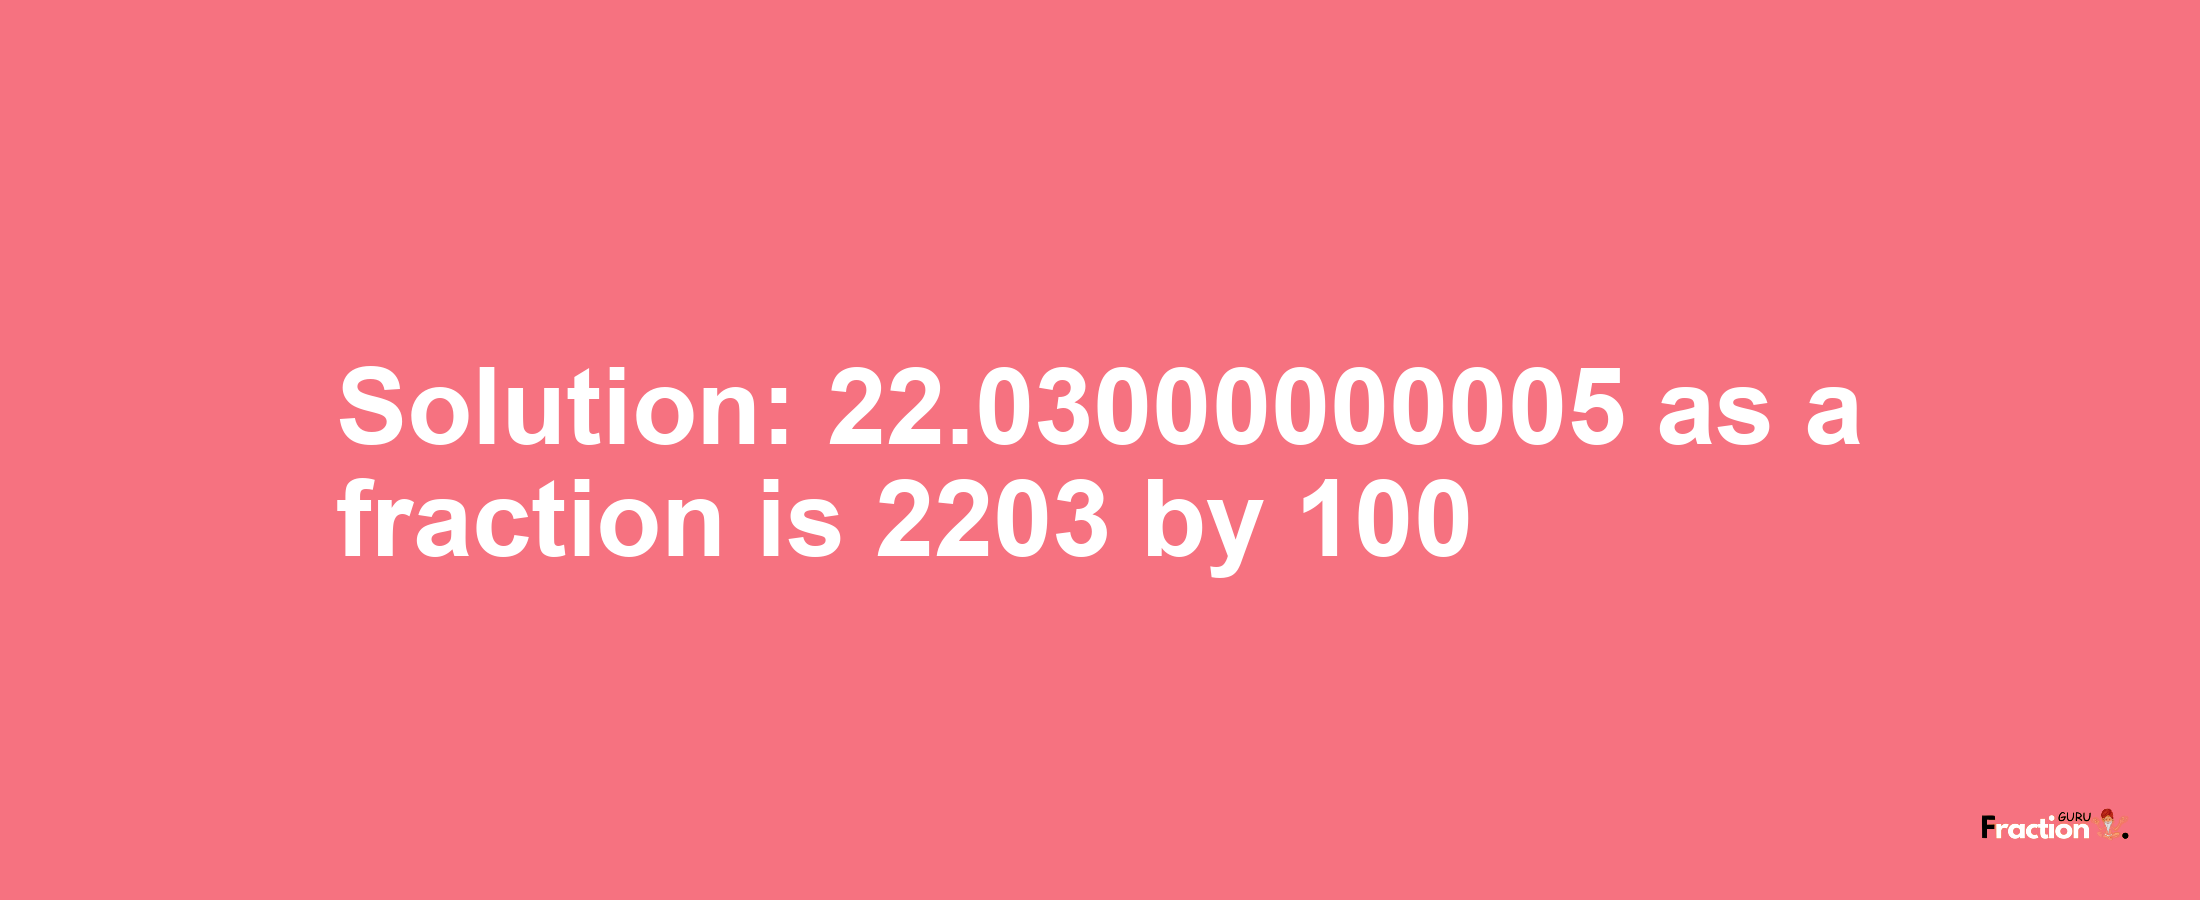 Solution:22.03000000005 as a fraction is 2203/100